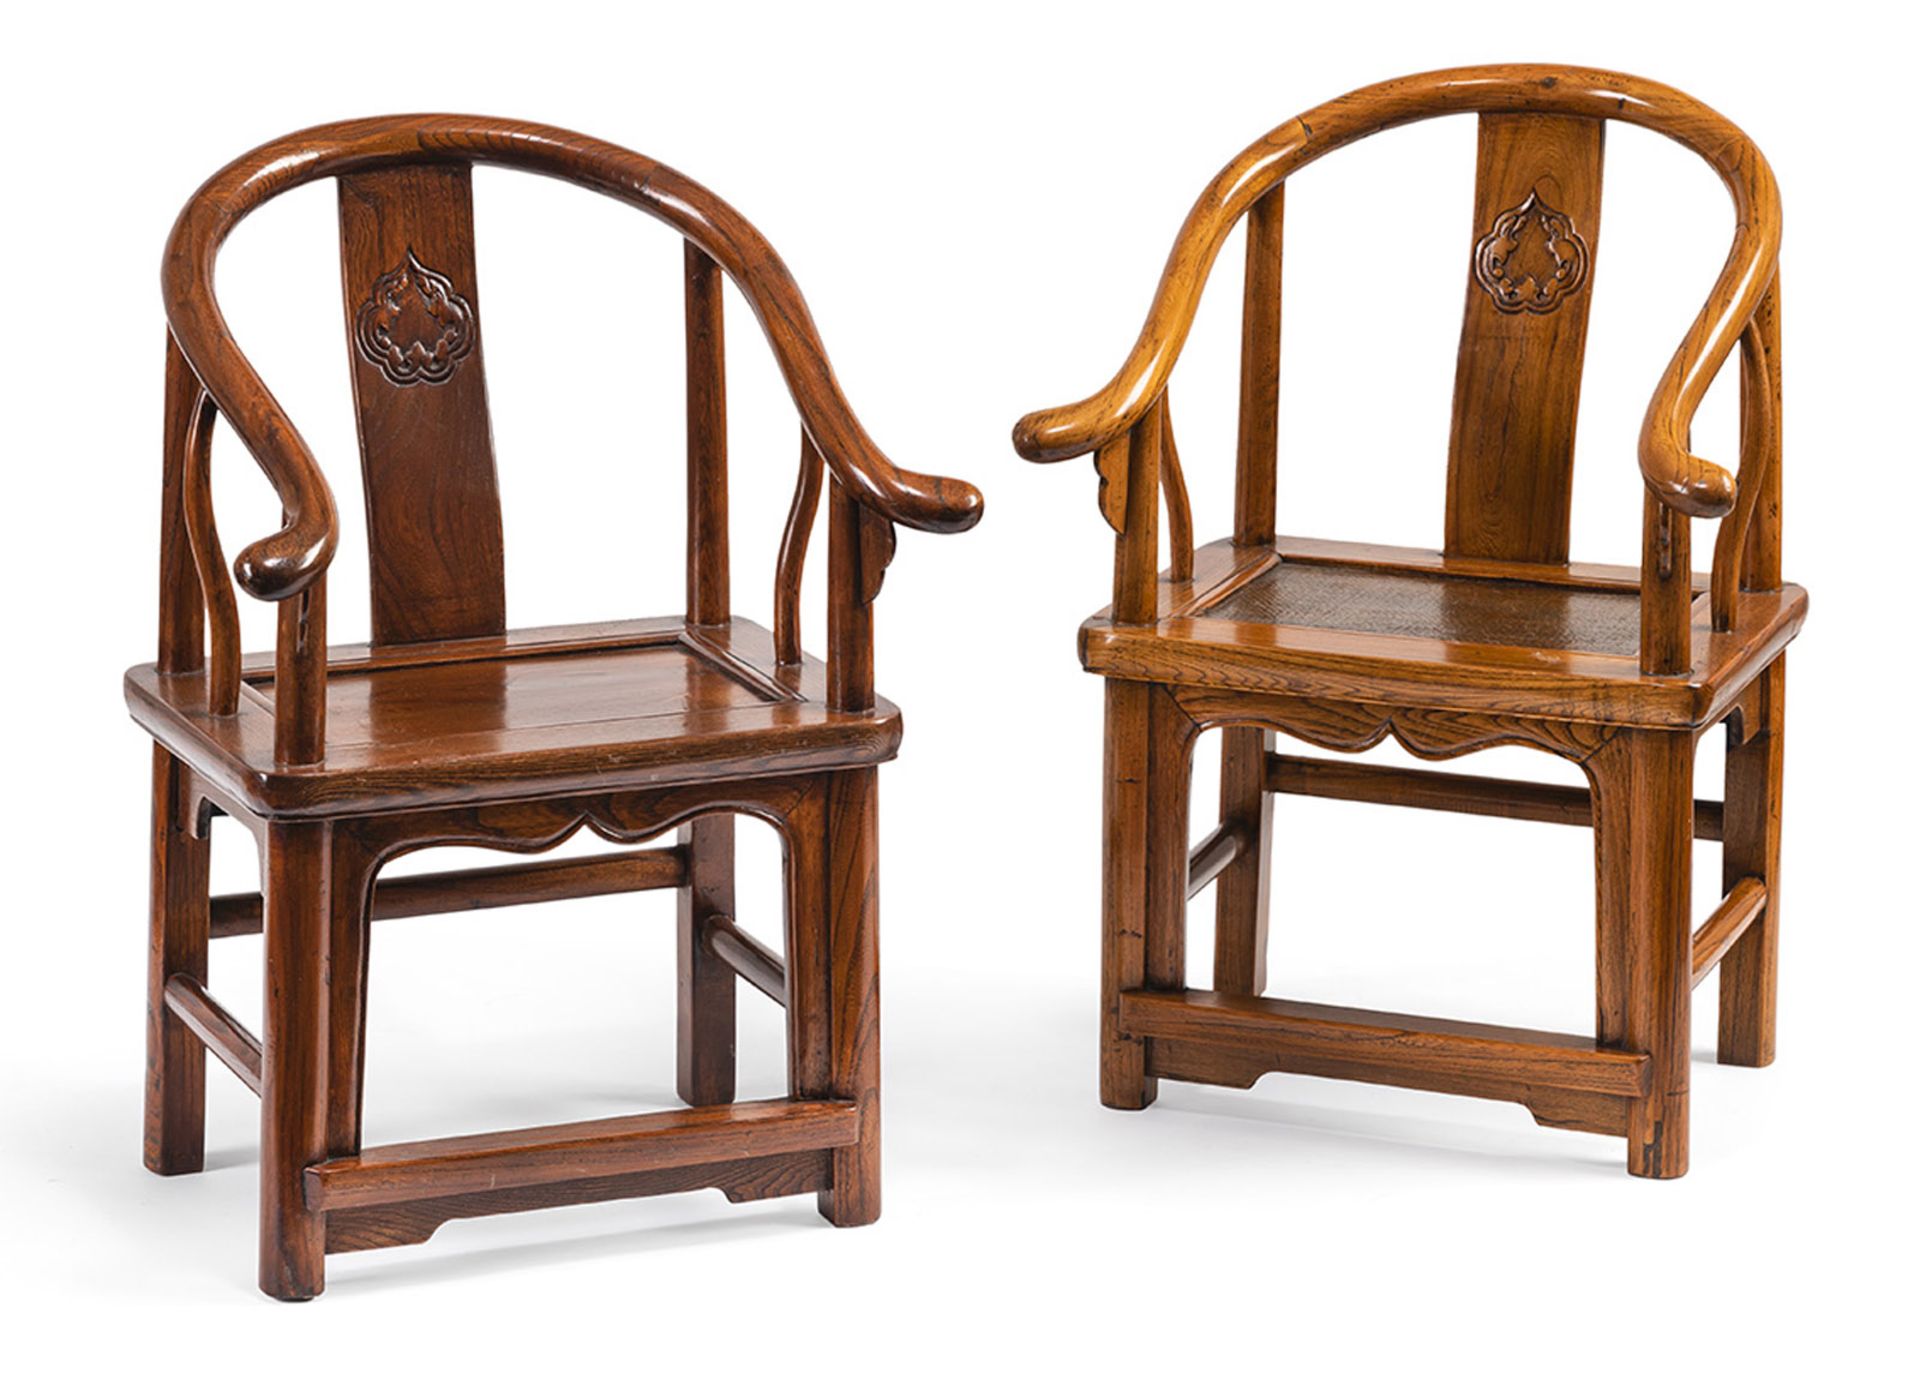 TWO WOODEN HORSESHOE-BACK ARMCHAIRS FOR CHILDREN